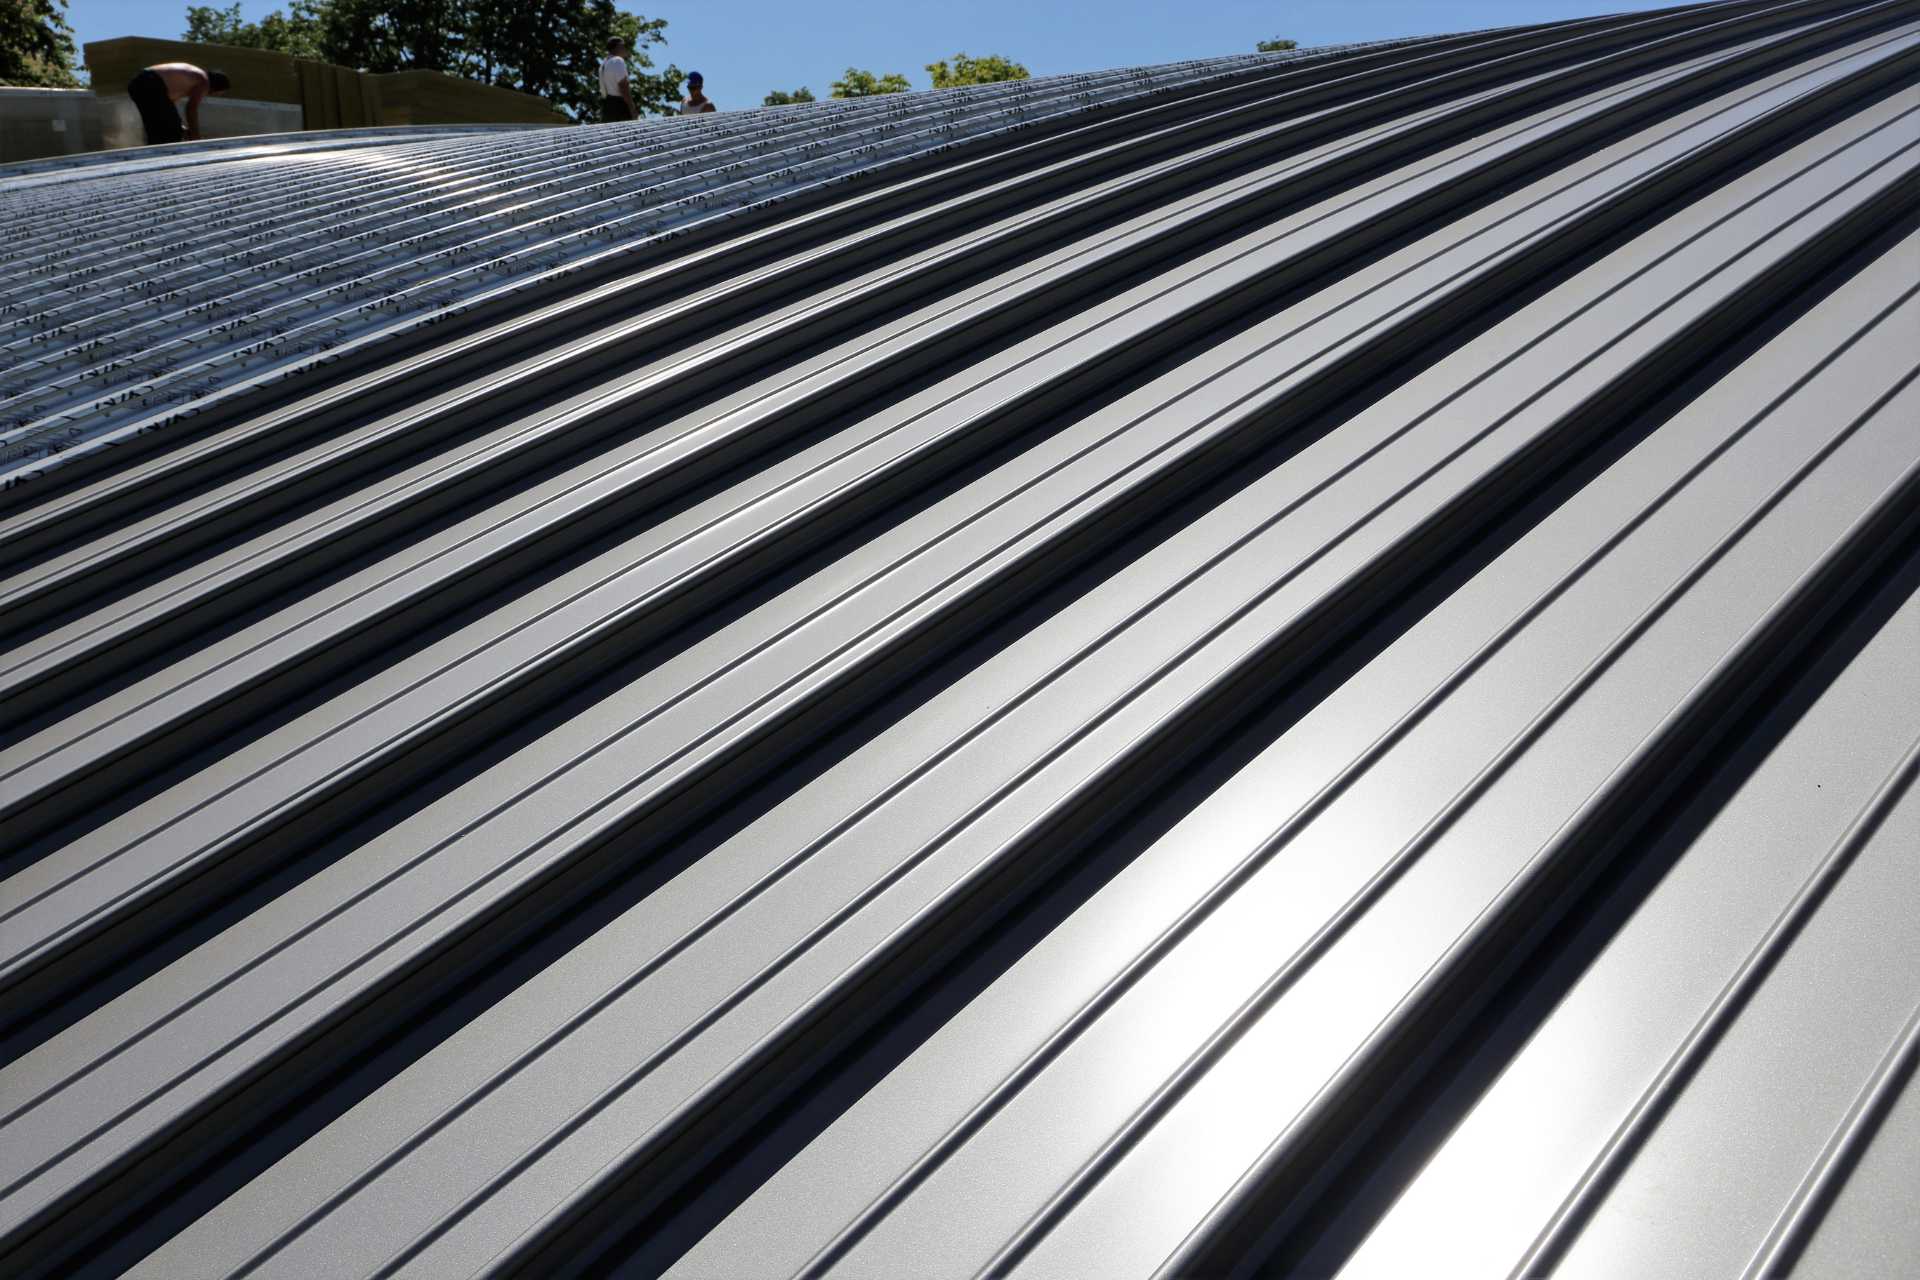 The Benefits of Metal Roofing: Why It’s Time to Make the Switch